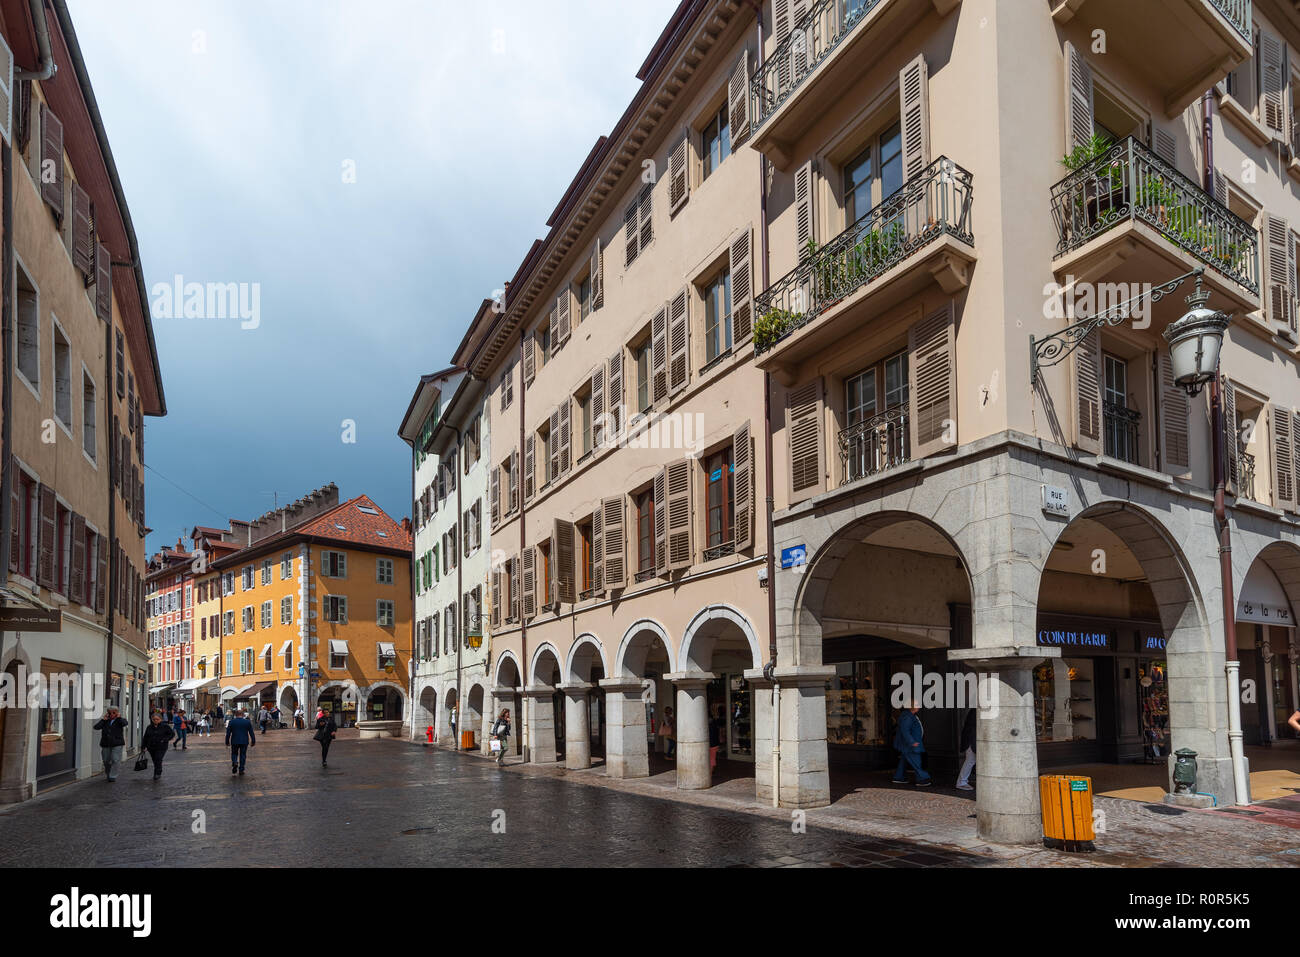 Street view of the beautiful town of Annecy in France showing a medieval urban fabric with arched shopping on the ground floors. Stock Photo